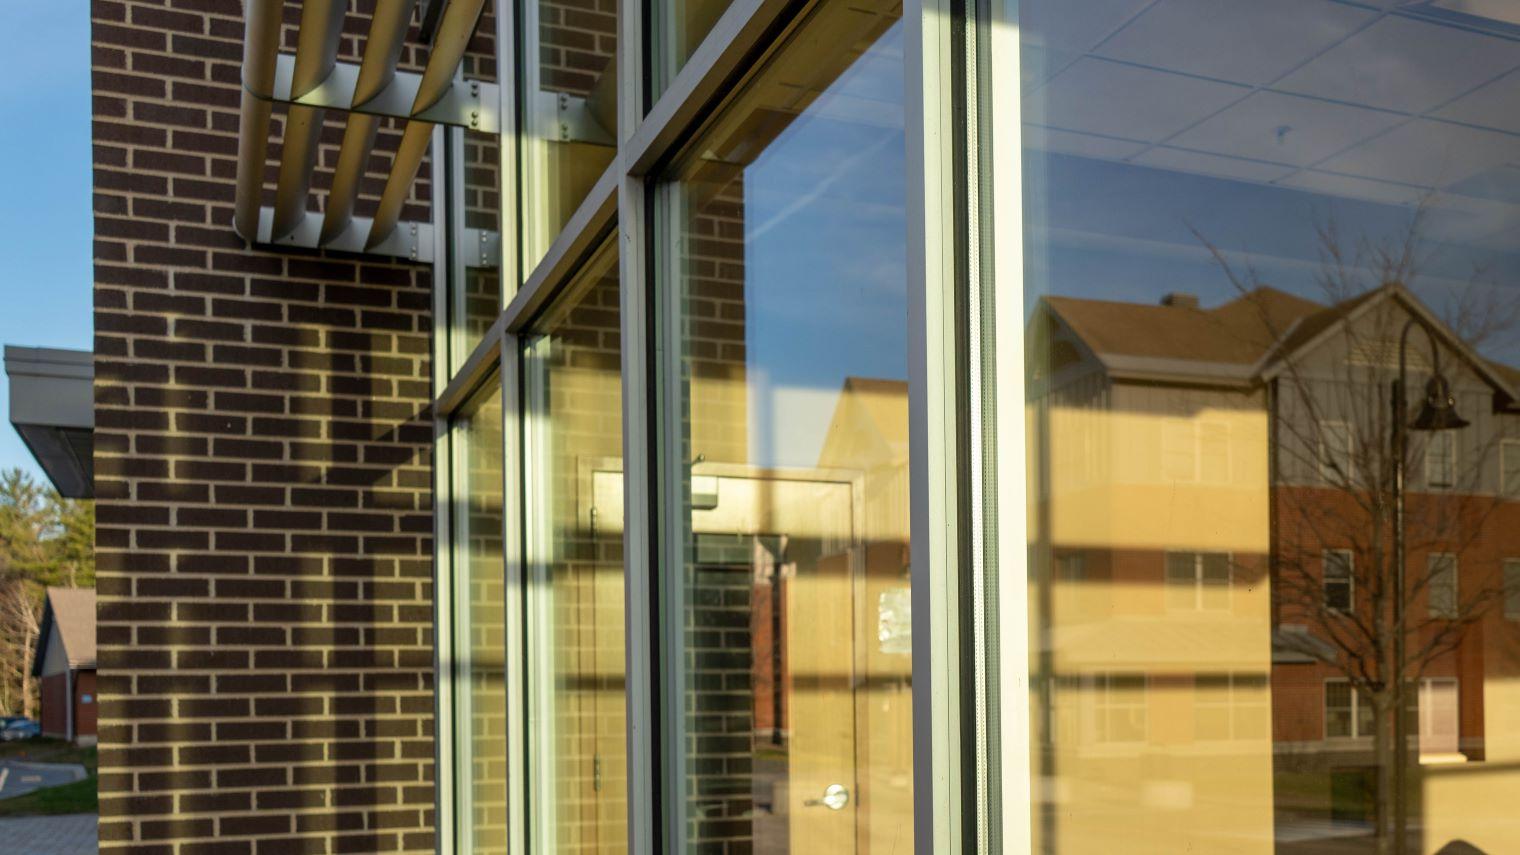 Reflection in a window showing another residence hall